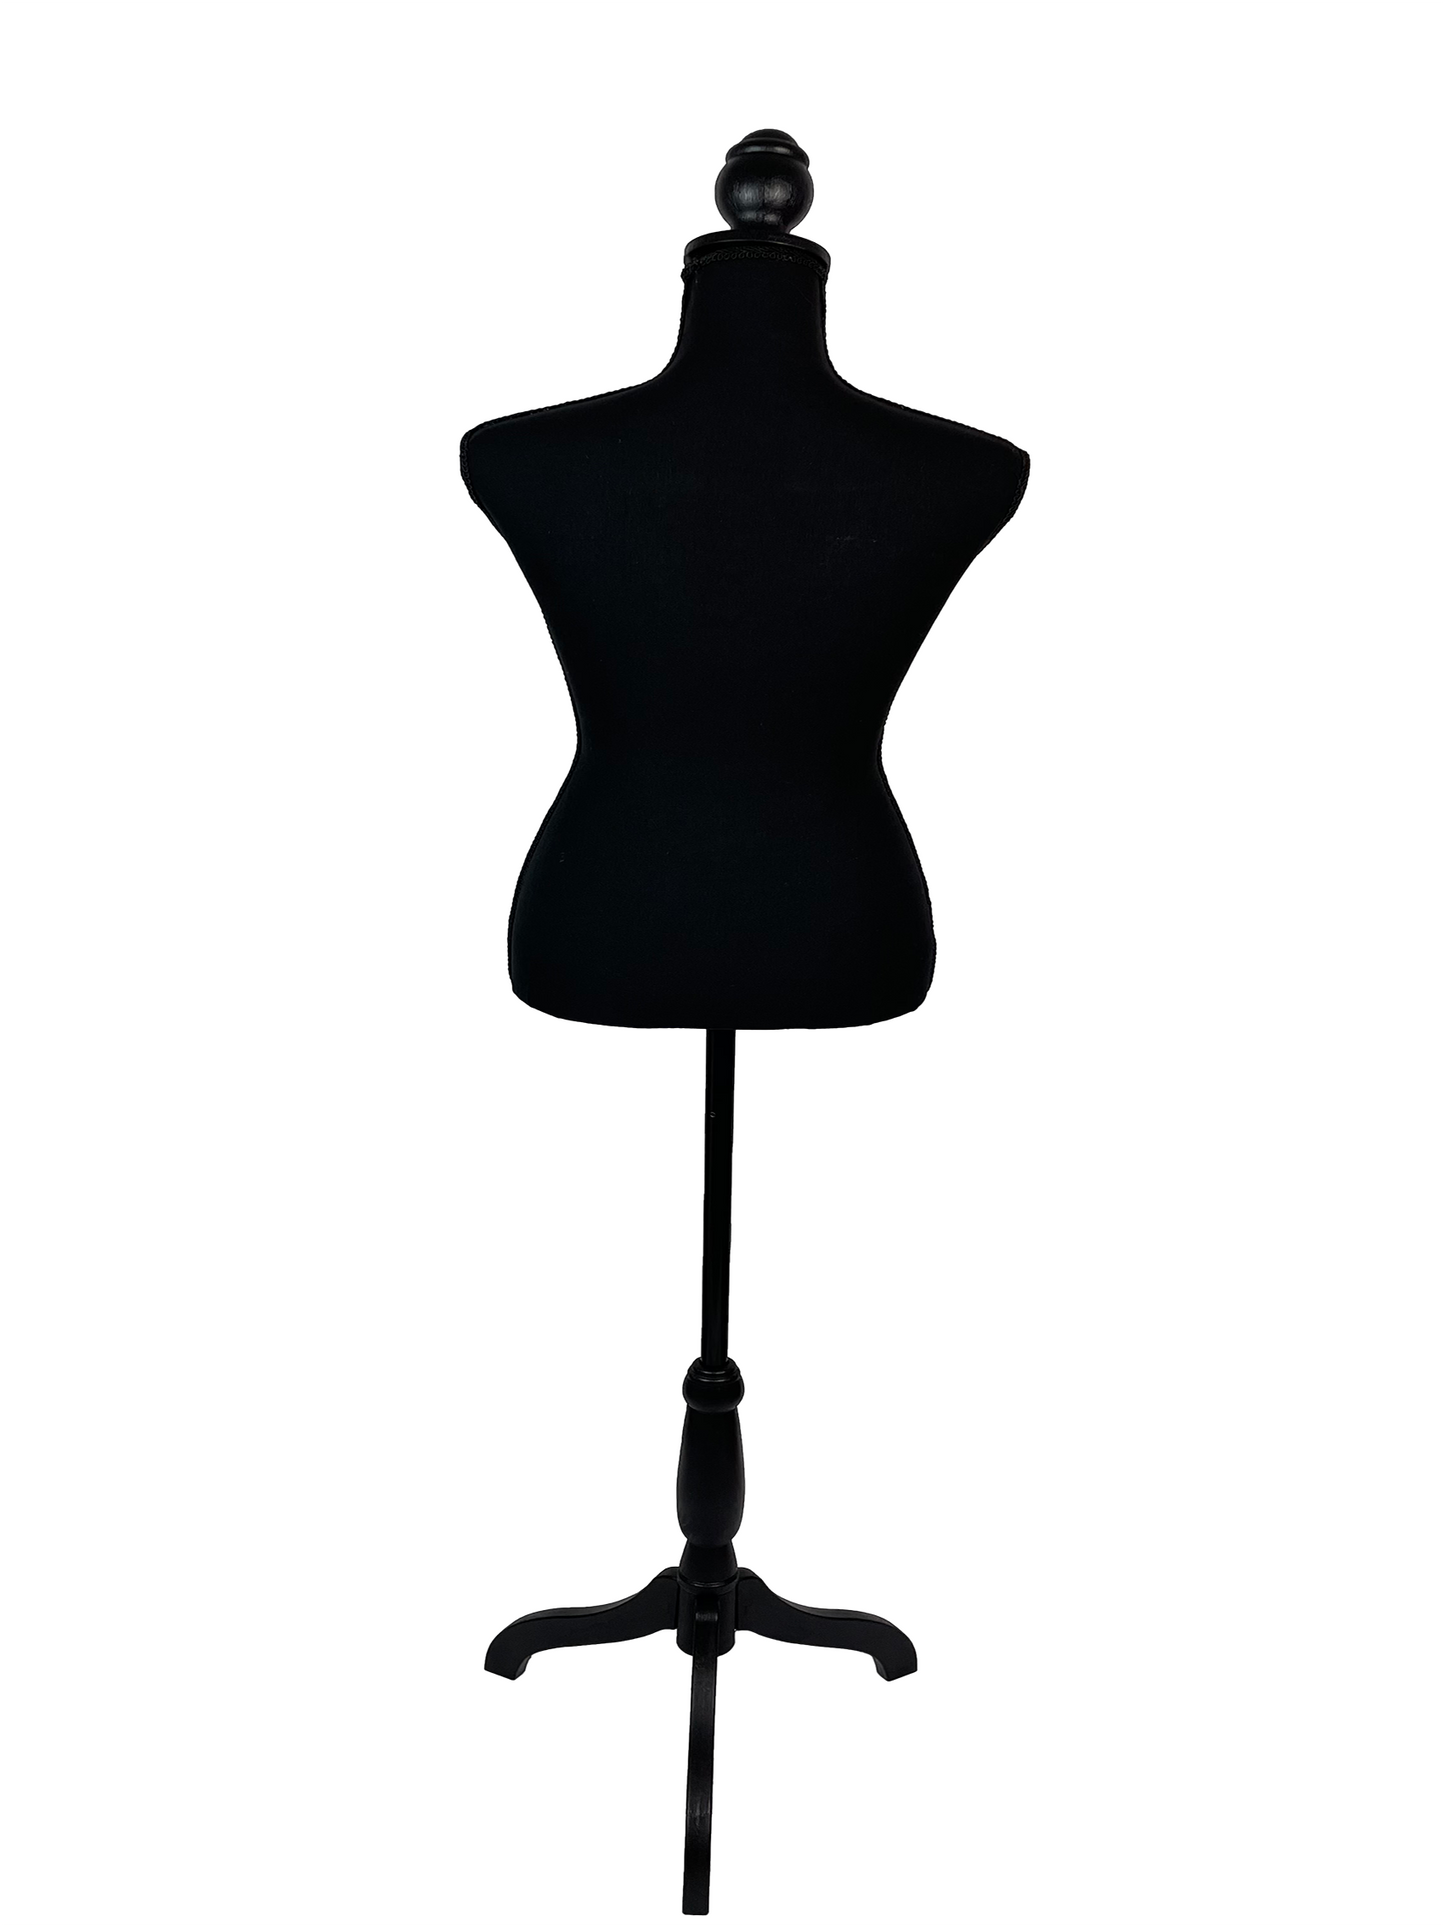 Female Mannequin Torso Dress Form with Wooden Tripod Base Stand Adjustable 60-67 Inch for Sewing Dressmakers Dress Jewelry Display,Velvet